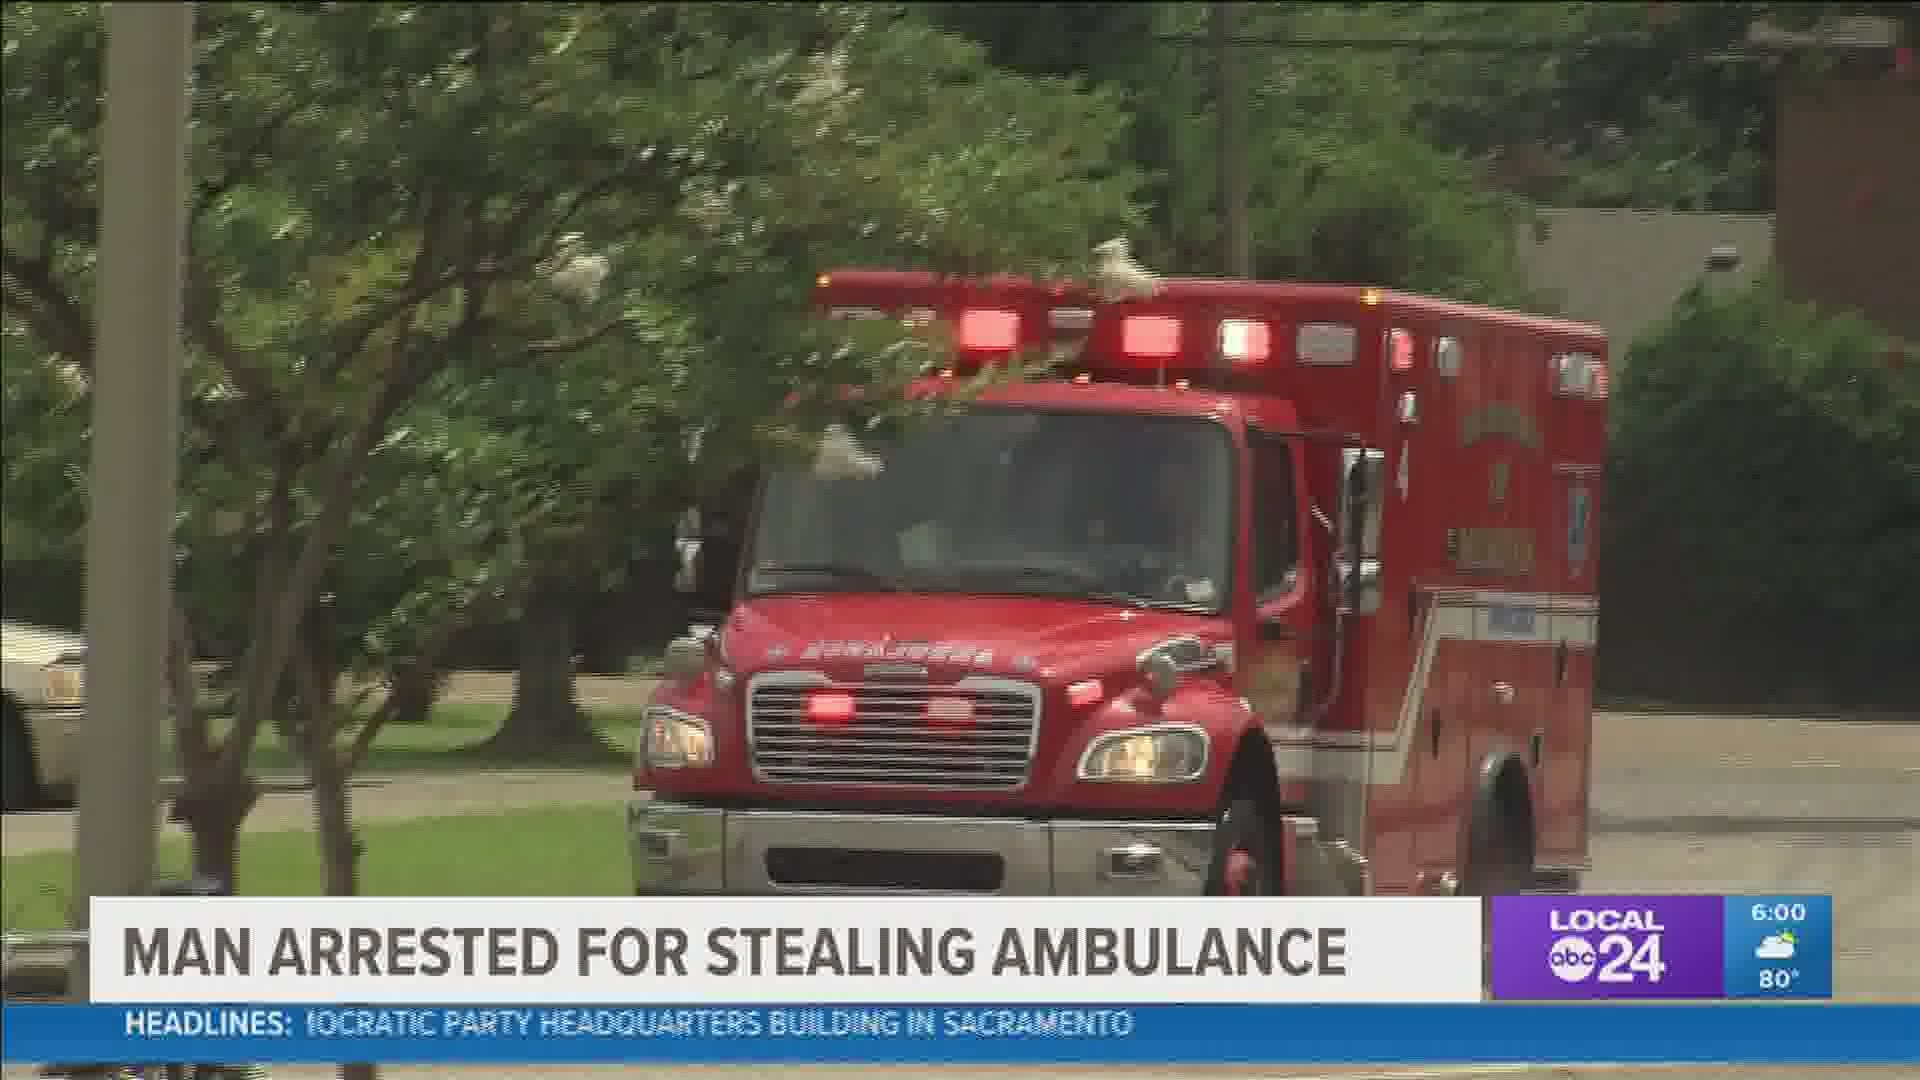 Authorities said they were led to 23-year-old Desai Billingsley after video showed him by stolen ambulance, bragging about it, with stolen medical supplies.